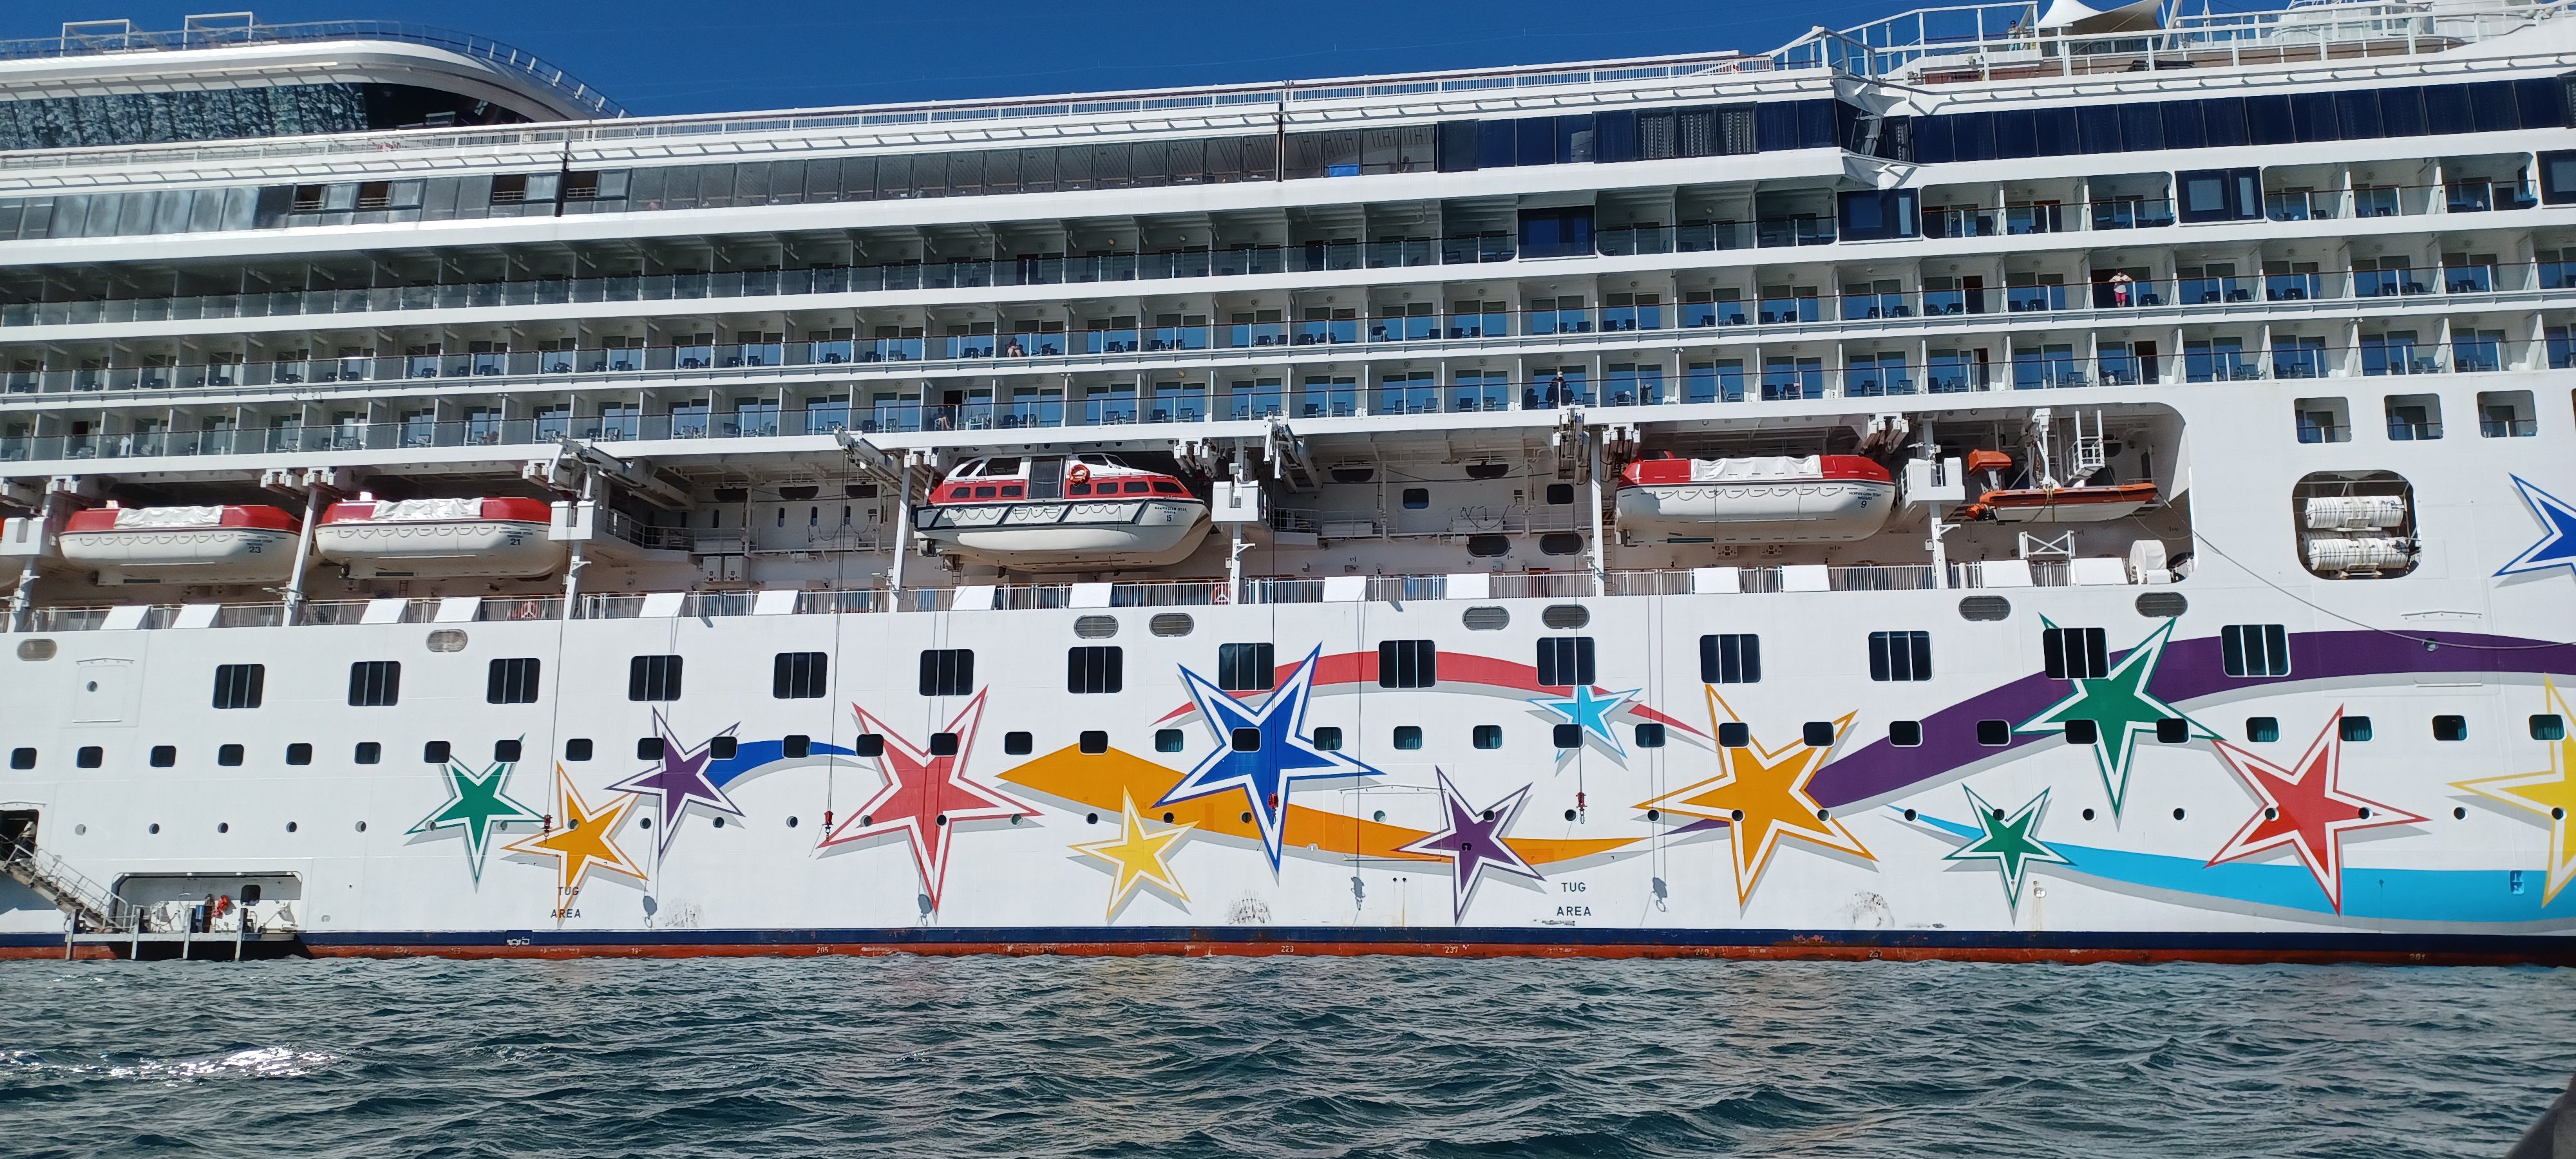 a large cruise ship with colorful stars on the side